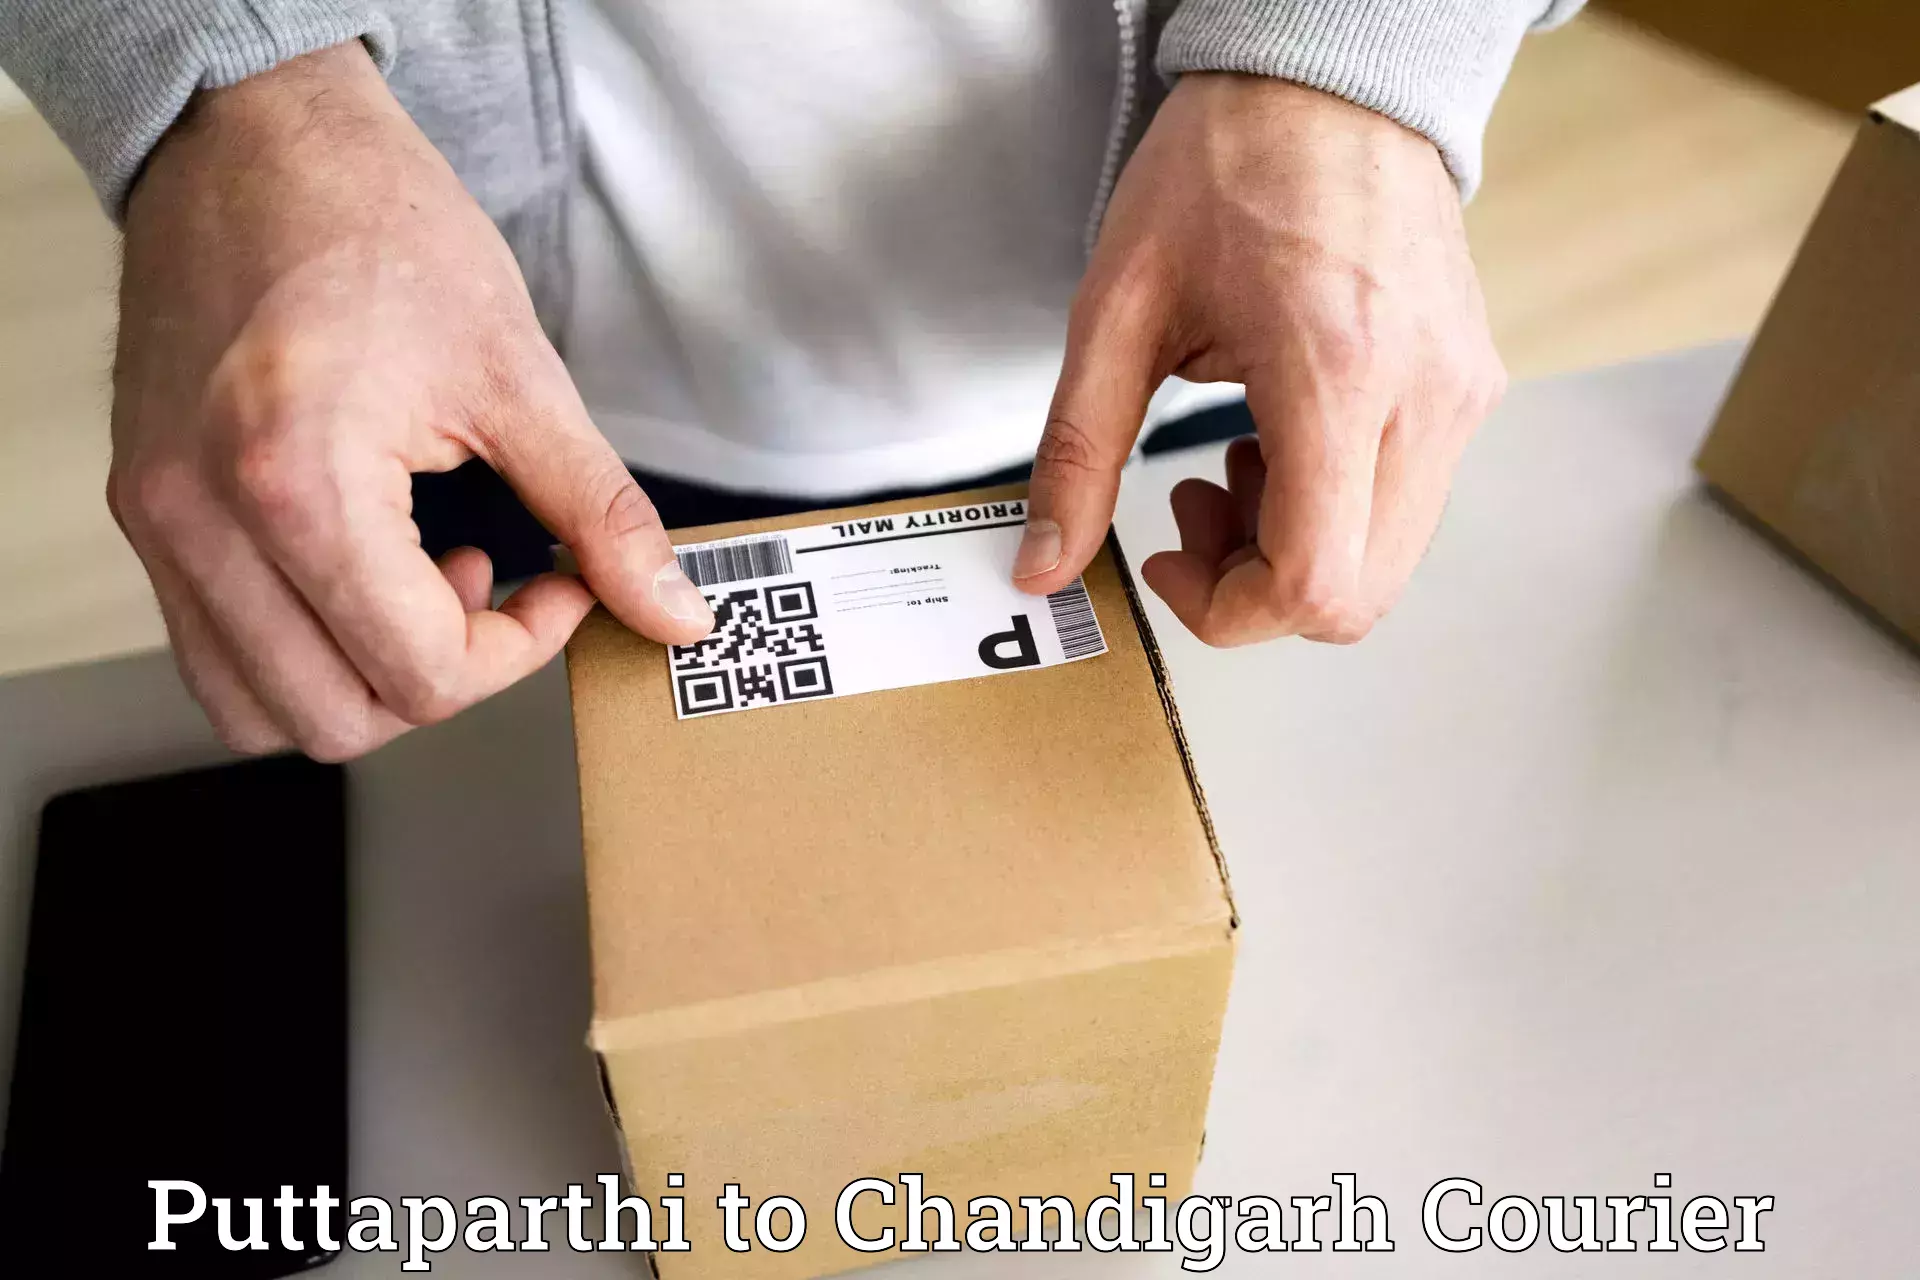 Fast delivery service Puttaparthi to Chandigarh